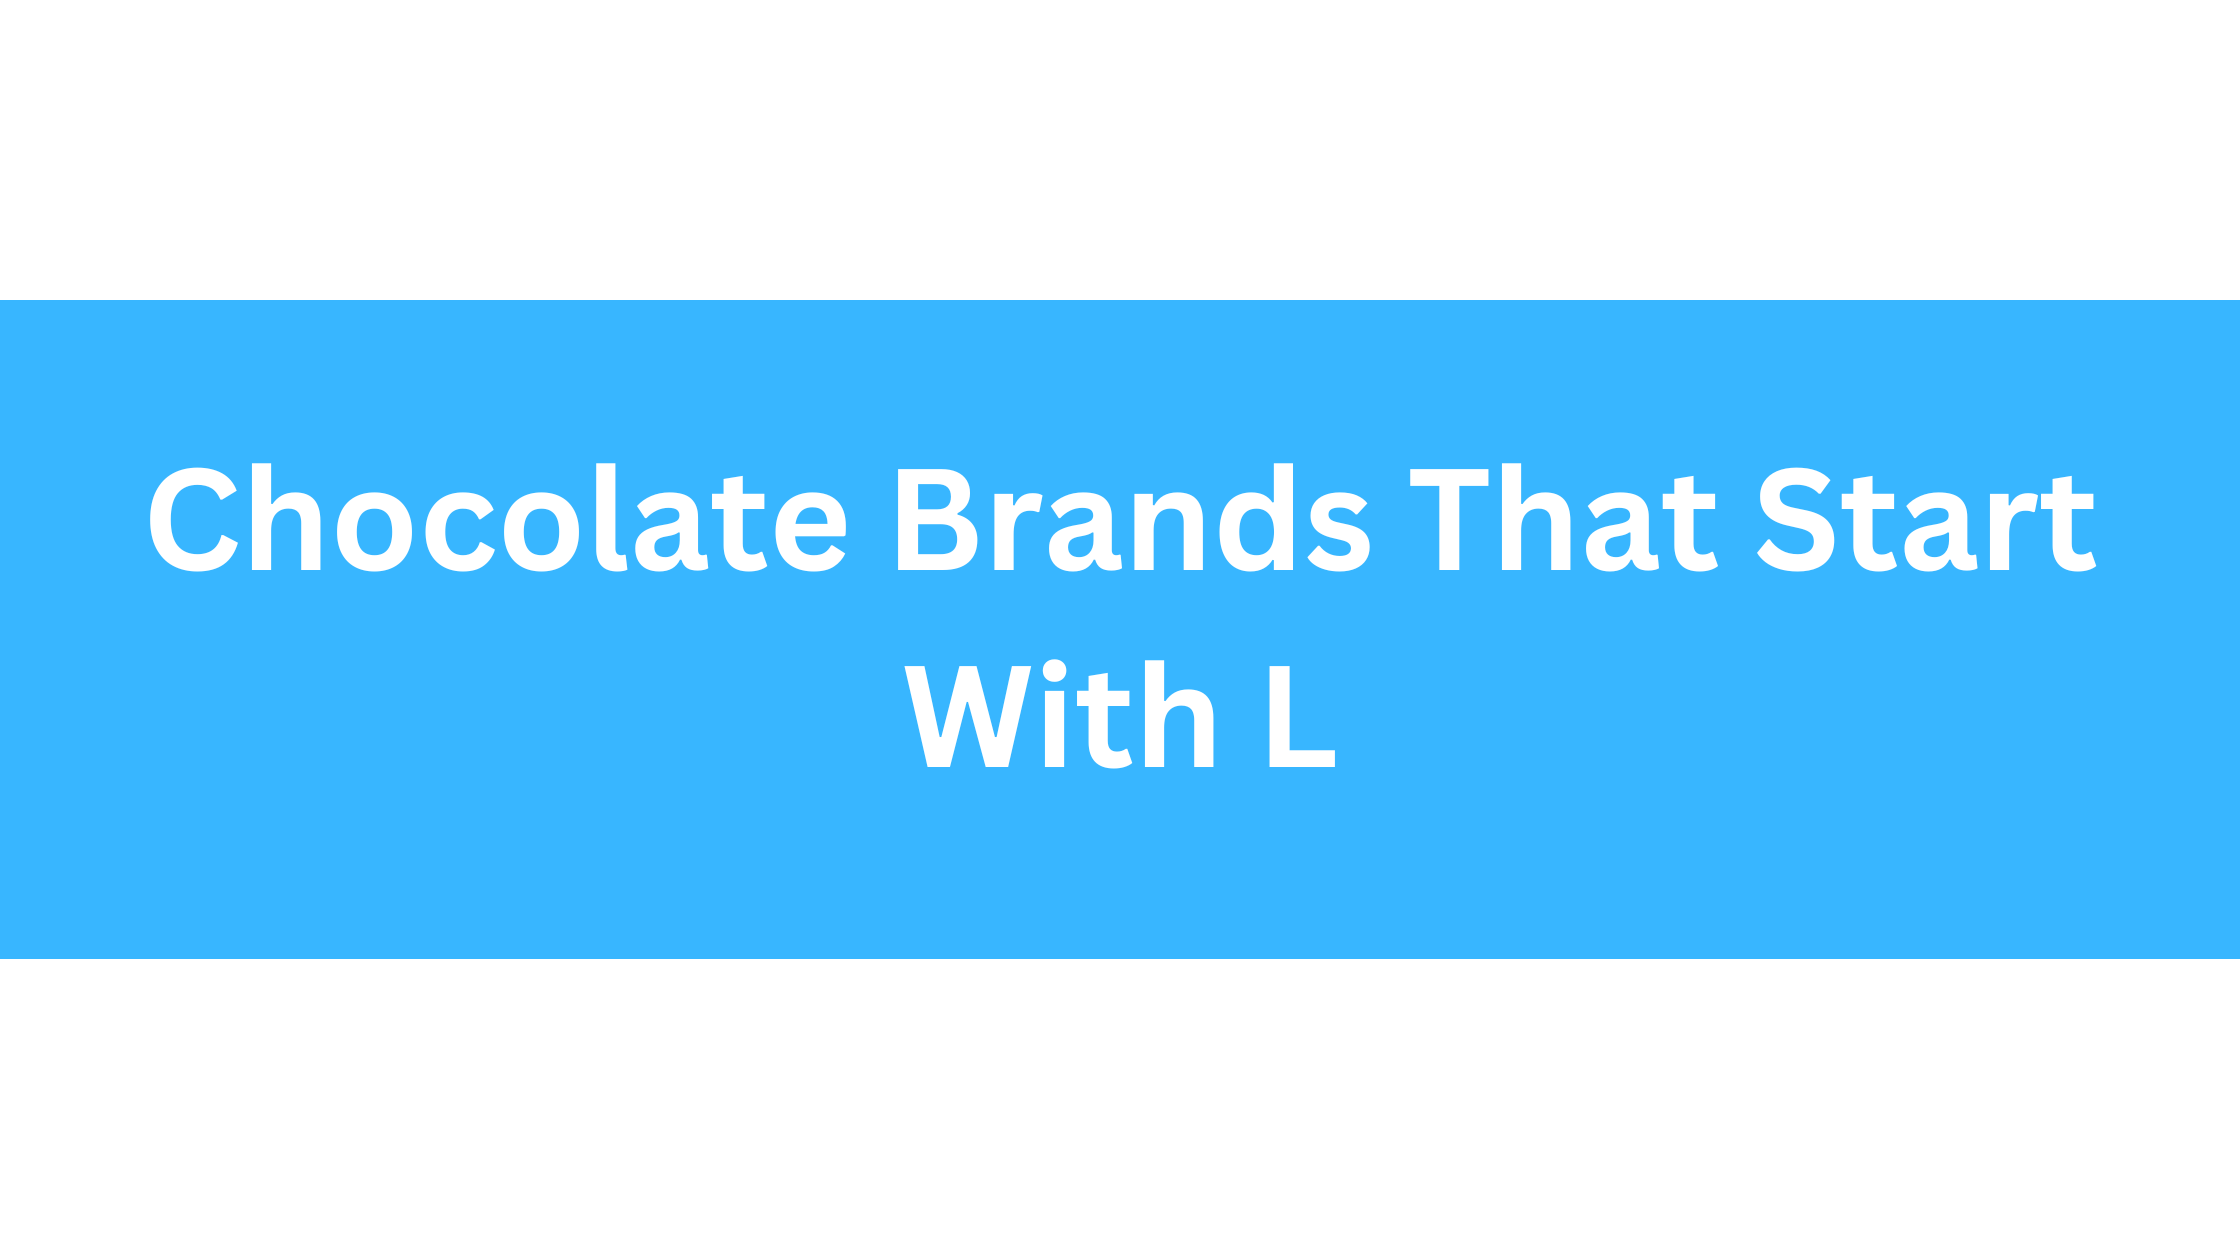 Chocolate Brands That Start With L